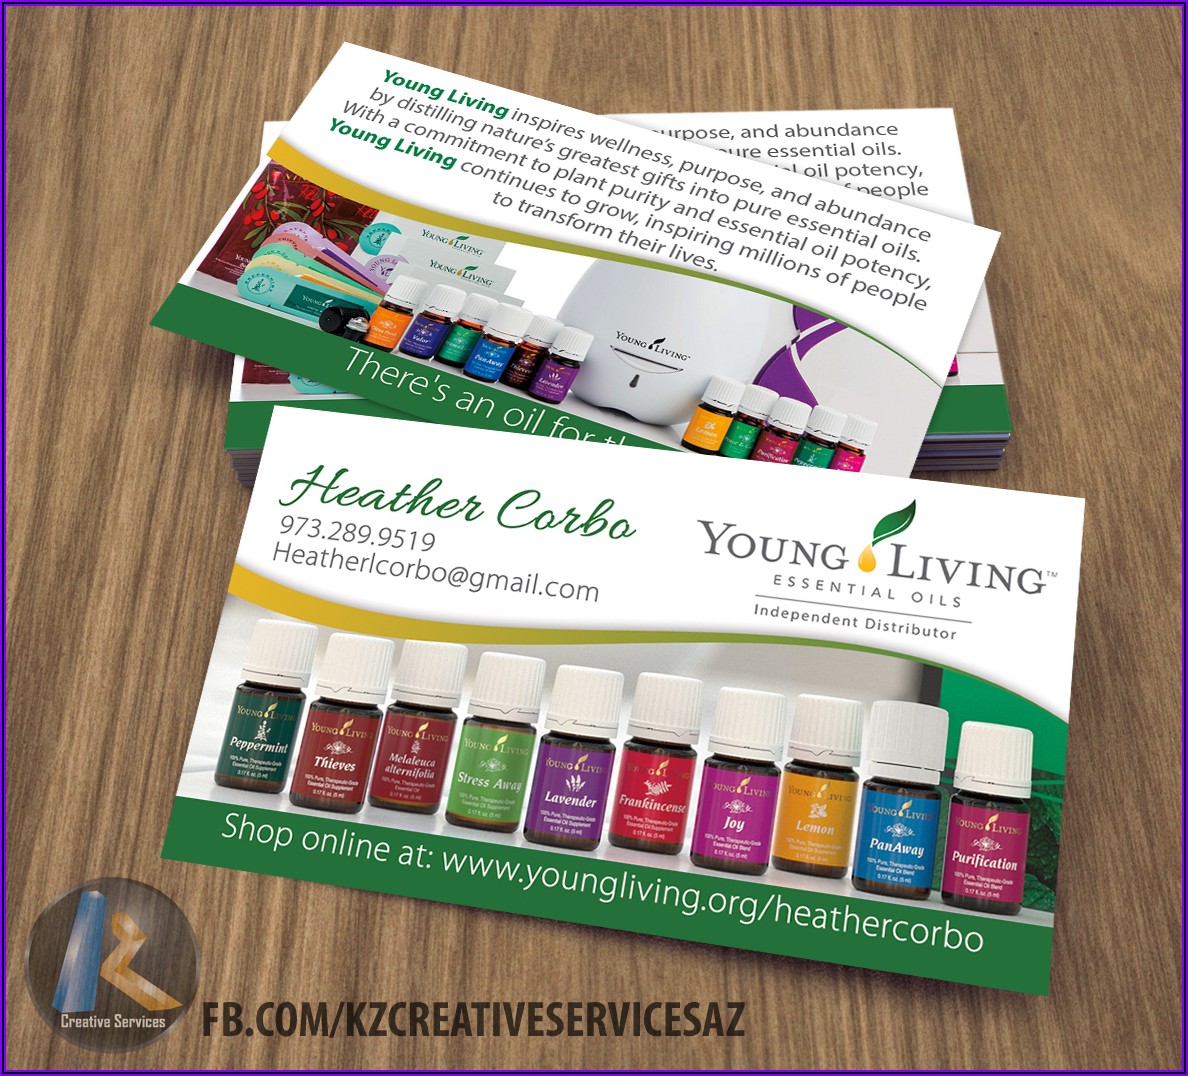 Young Living Images For Business Cards